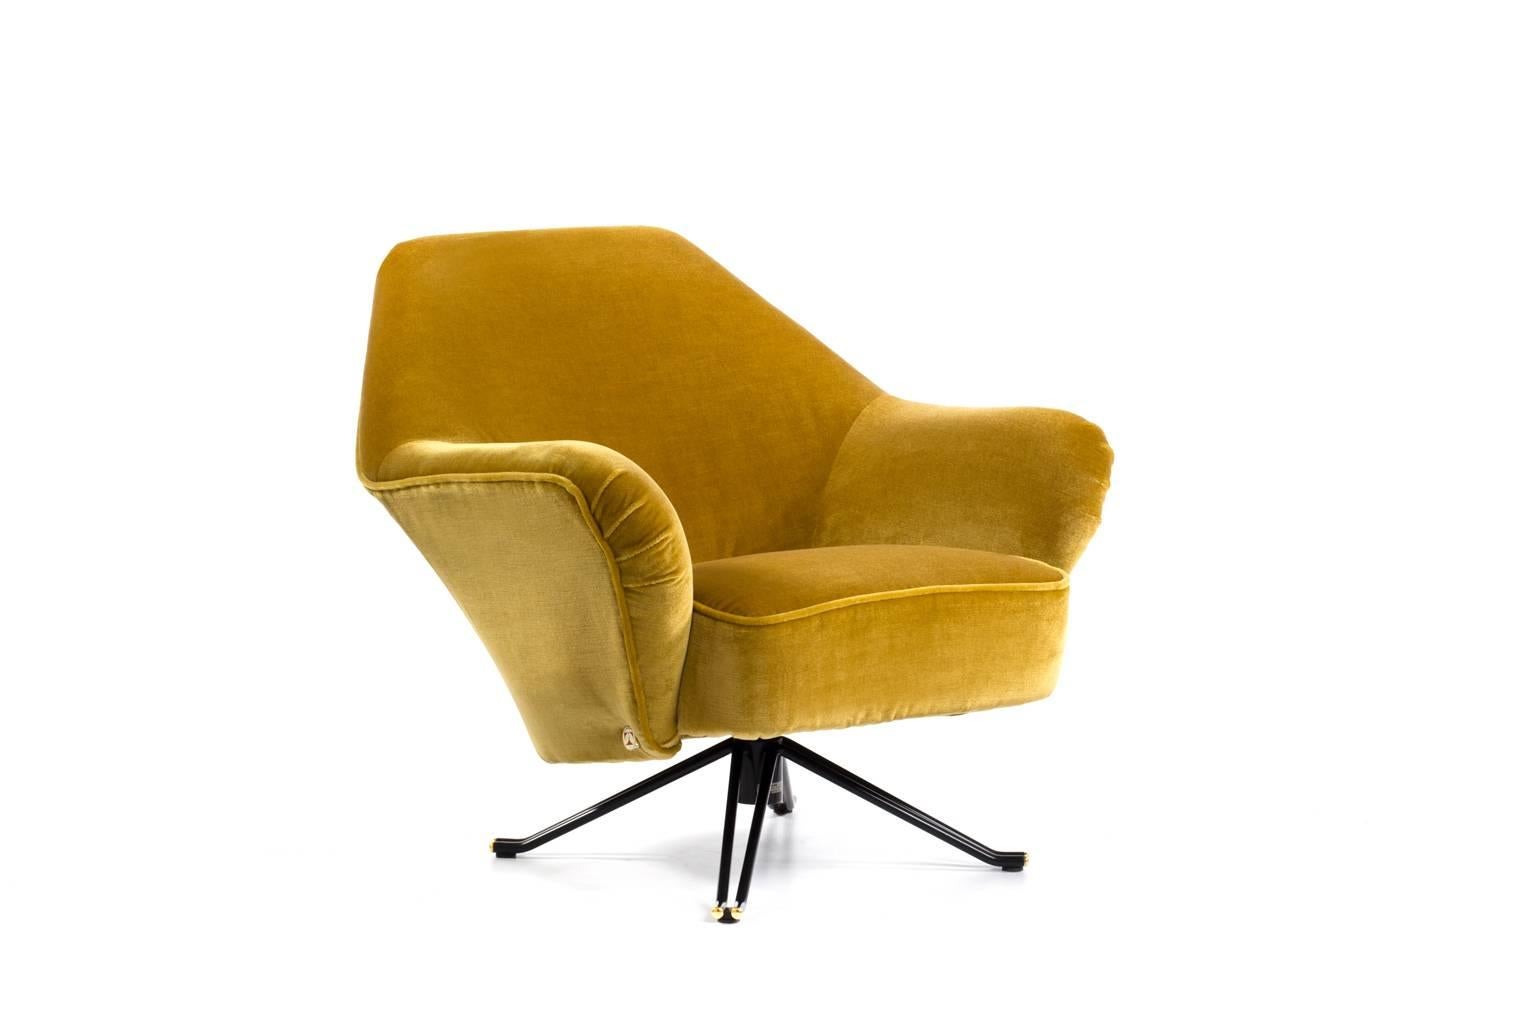 Rare P32 lounge chair by Osvaldo Borsani for Tecno, Italy, 1956.
Beautiful elegant soft forms on a nice black metal swivel base with chic brass details. Upholstered in a high quality warm yellow ochre velvet. The chair is equipped with nice